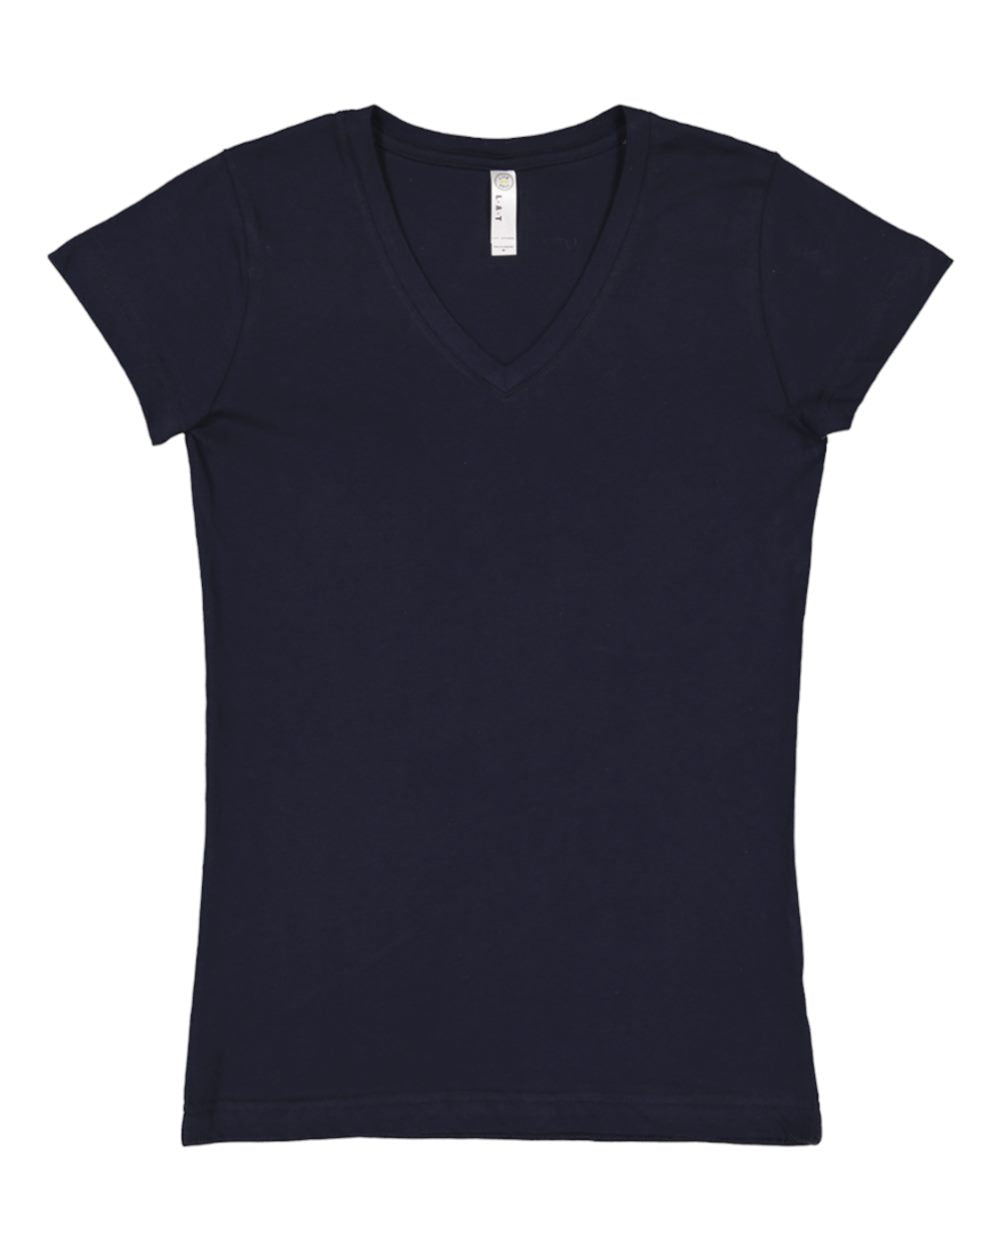 Ladies (Junior) Fitted --  (V-Neck) T-Shirt -- 100% Cotton -- Navy Color